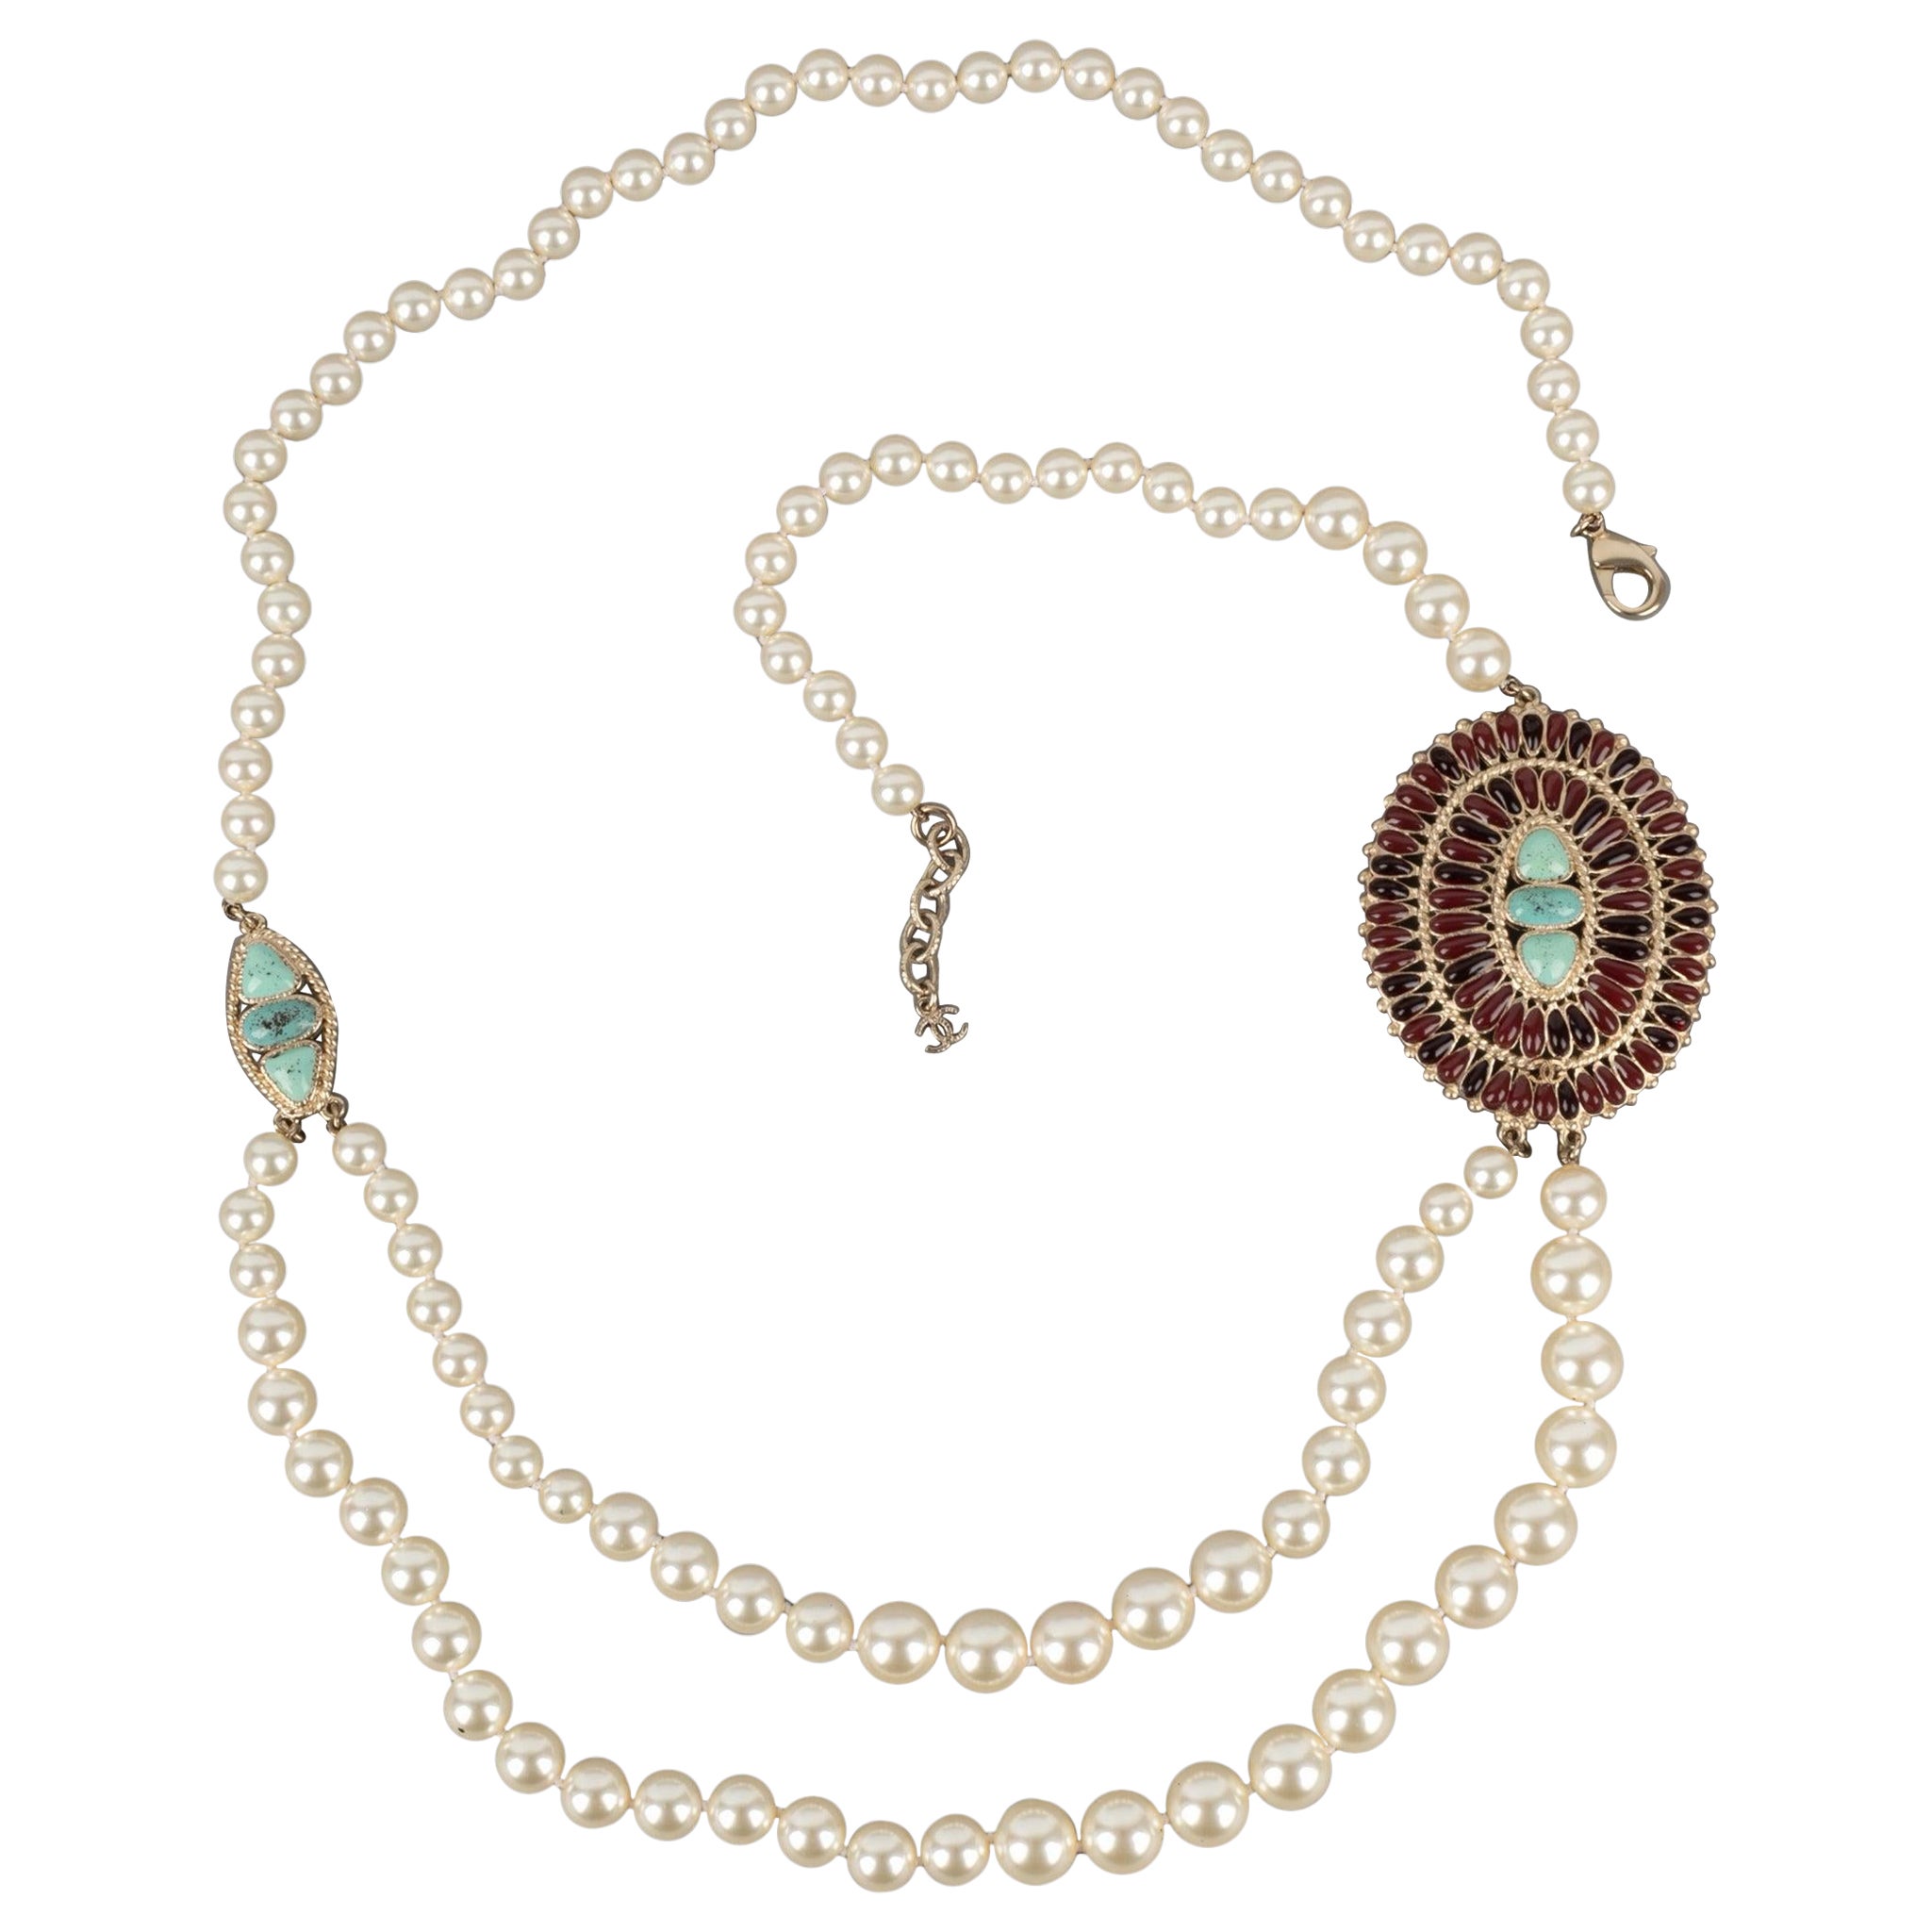 Chanel Long Necklace with Pearls and Blue and Burgundy Resin Medallions, 2014